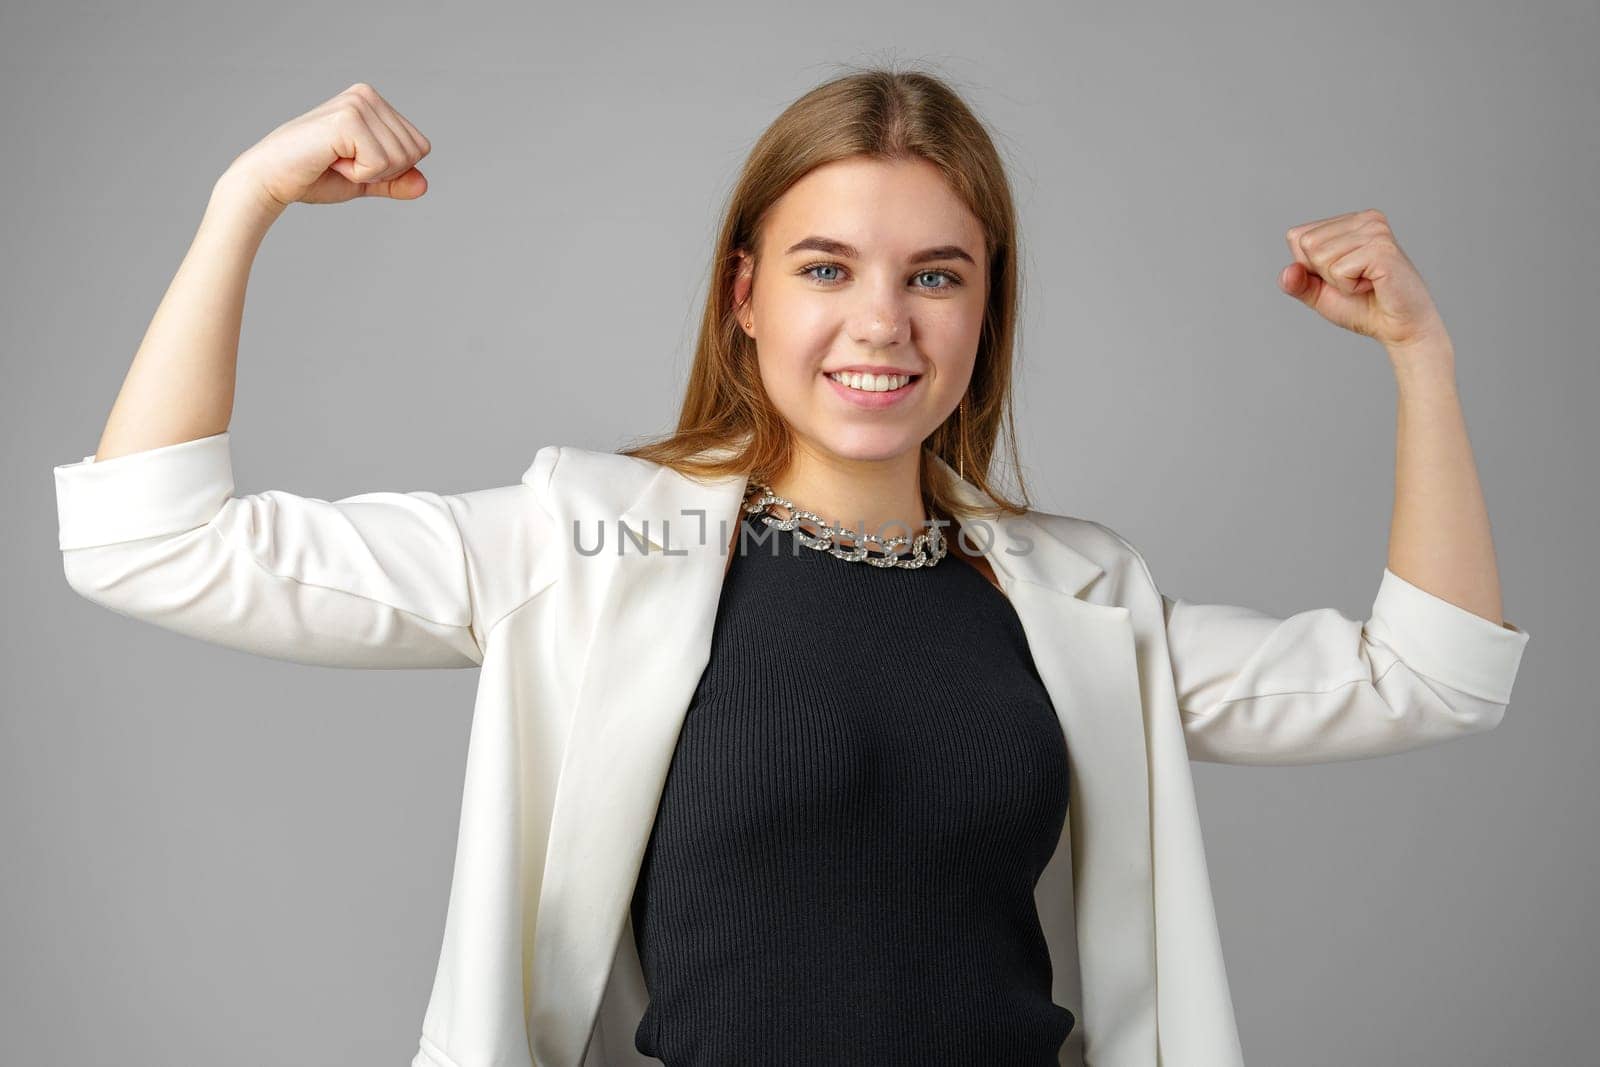 Confident Young Businesswoman Flexing Muscles in Smart Casual Attire Against Grey Background by Fabrikasimf